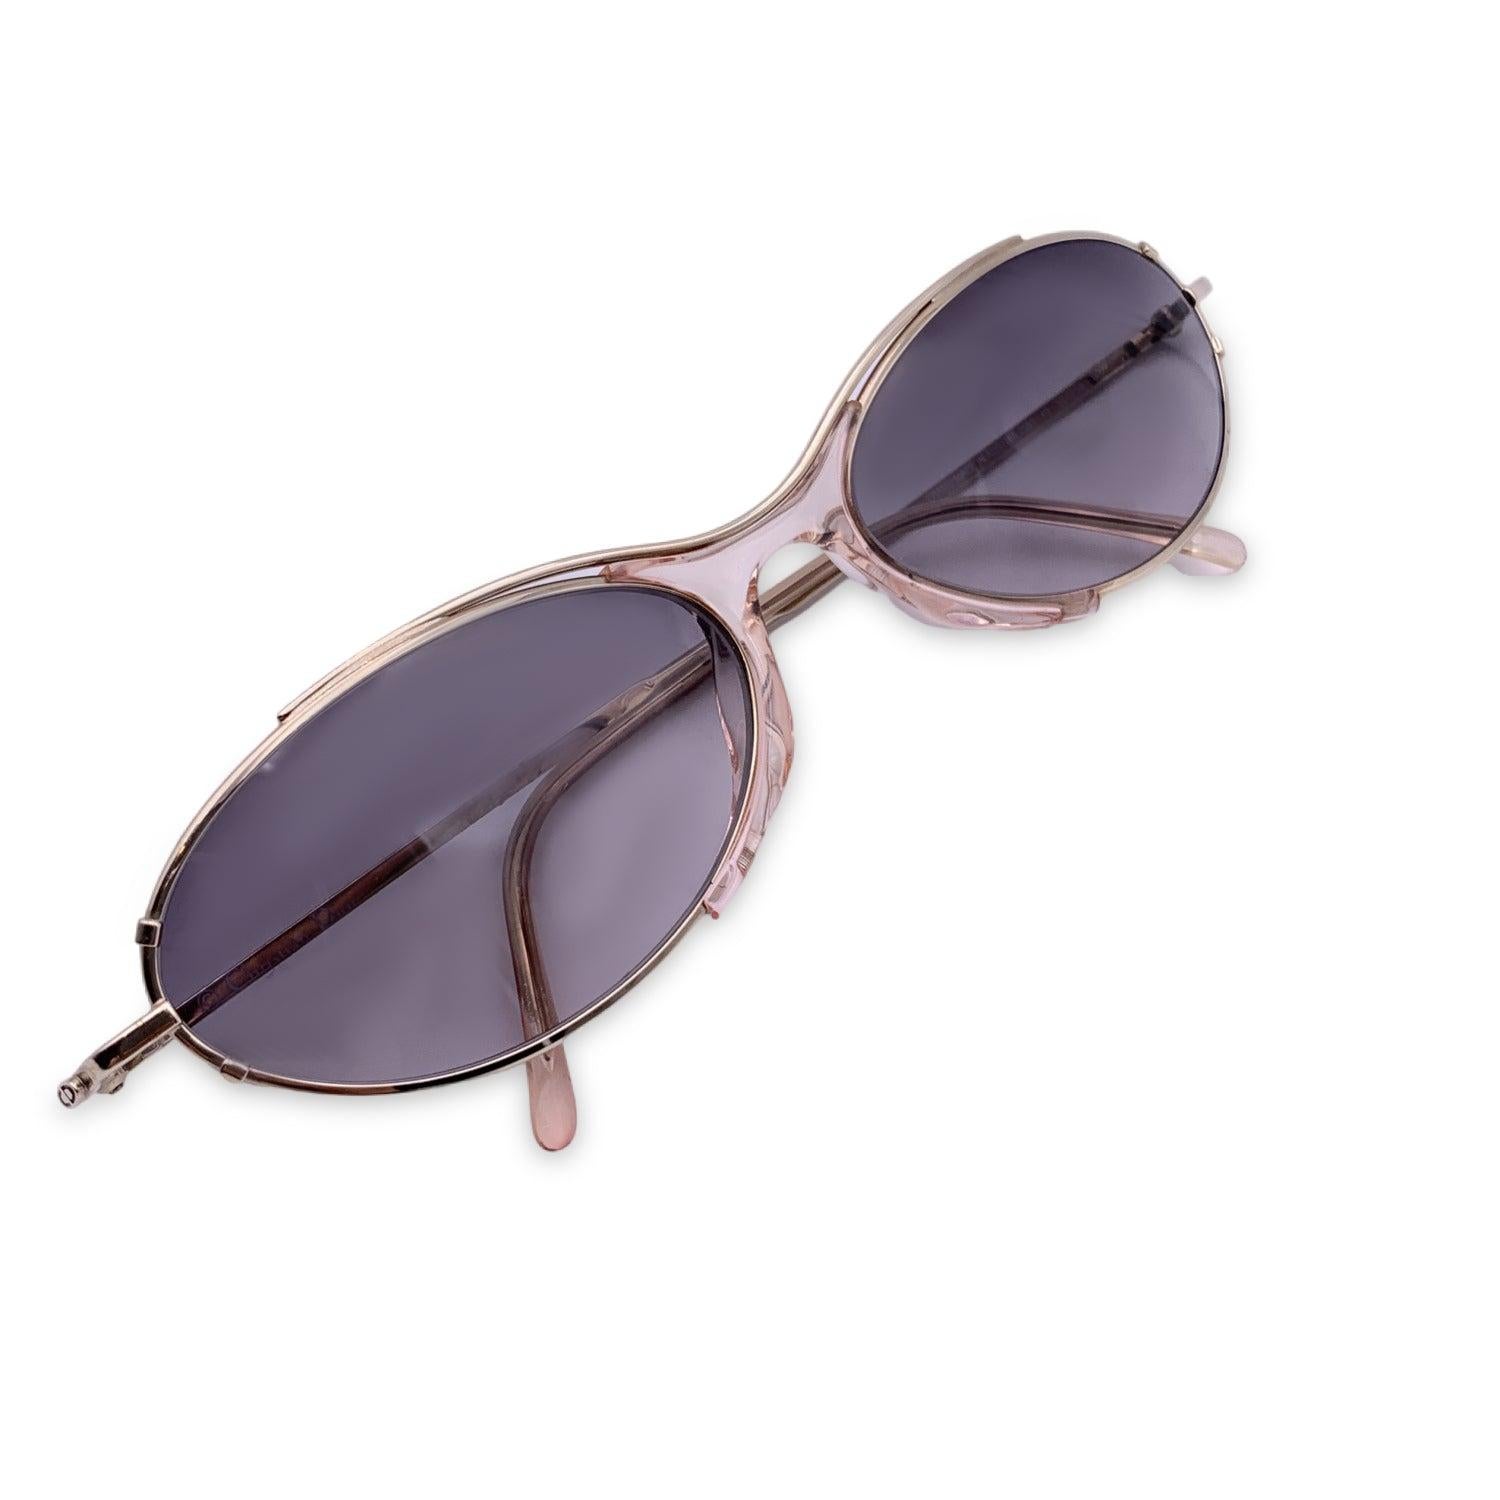 Vintage Christian Dior Women Sunglasses, Mod. 2551 40. Size: 58/18 130mm. Silver metal frame with a transparent pink detail on the bridge. CD logo on silver temples . 100% Total UVA/UVB protection. Grey gradient lenses.

Details

MATERIAL: